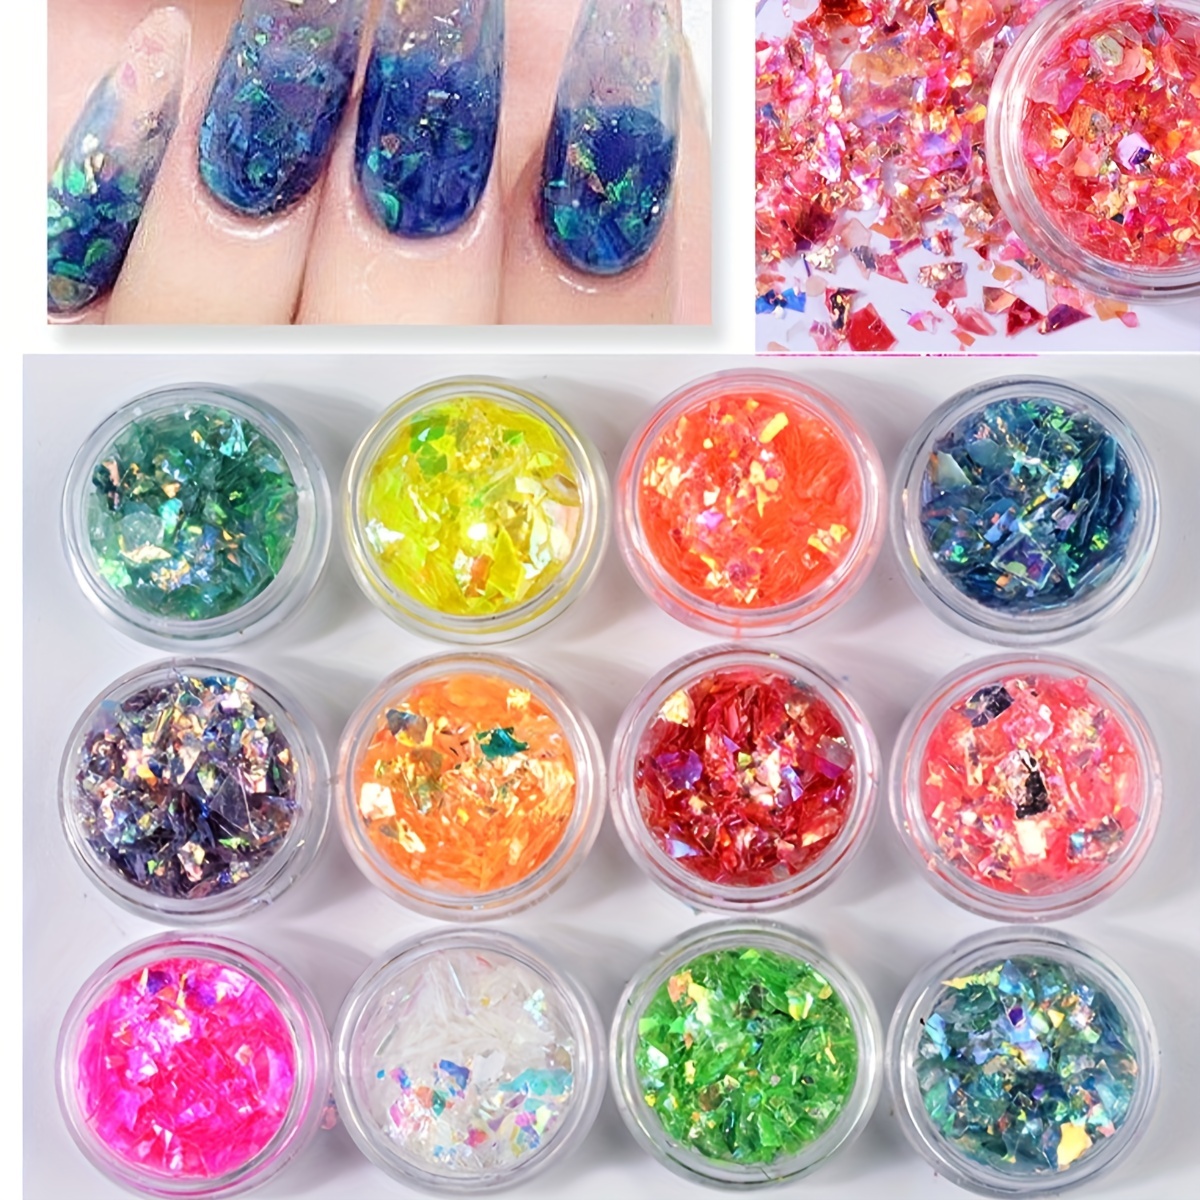 6Colors/Box Nail Art Mermaid Glitter Sequins Chunky Nail Glitter Sequins  Sparkly Flakes Holographic Glitter Slices For Nails